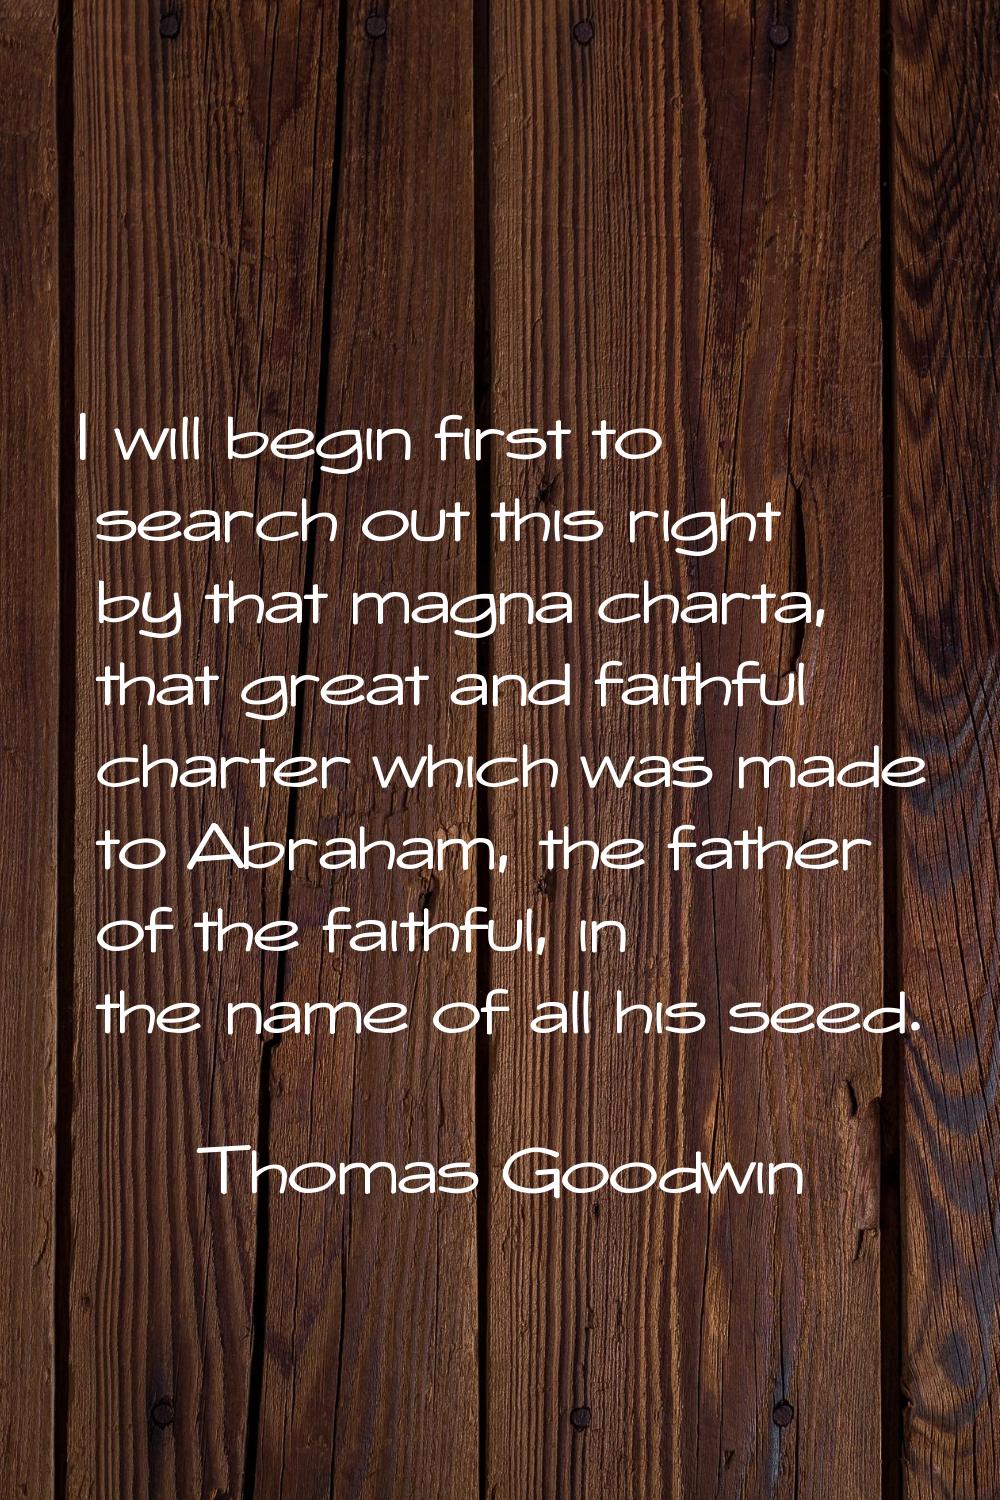 I will begin first to search out this right by that magna charta, that great and faithful charter w